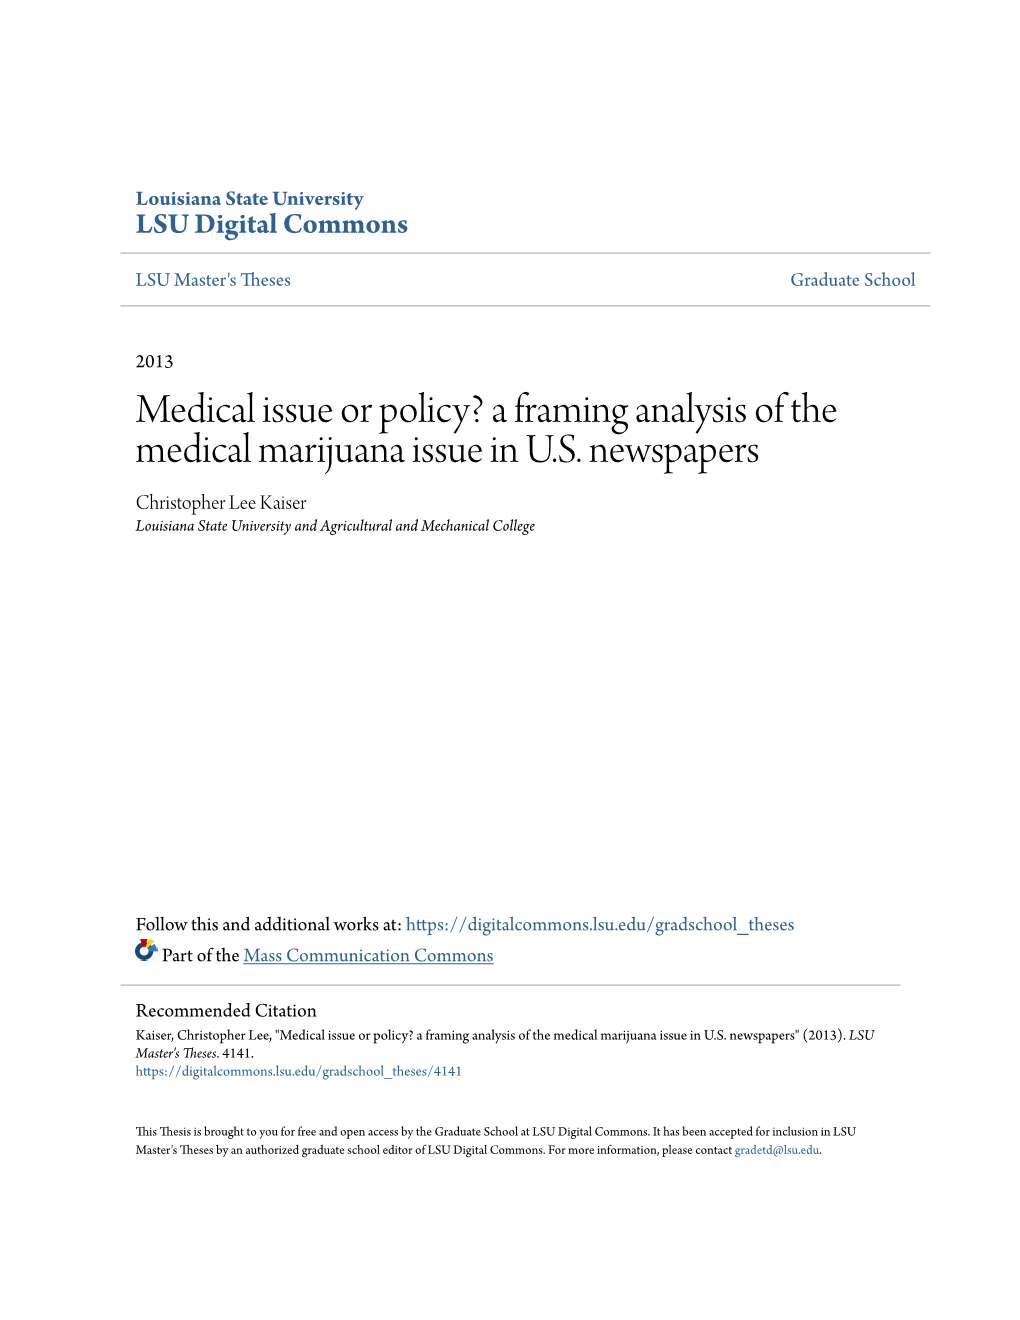 Medical Issue Or Policy? a Framing Analysis of the Medical Marijuana Issue in U.S